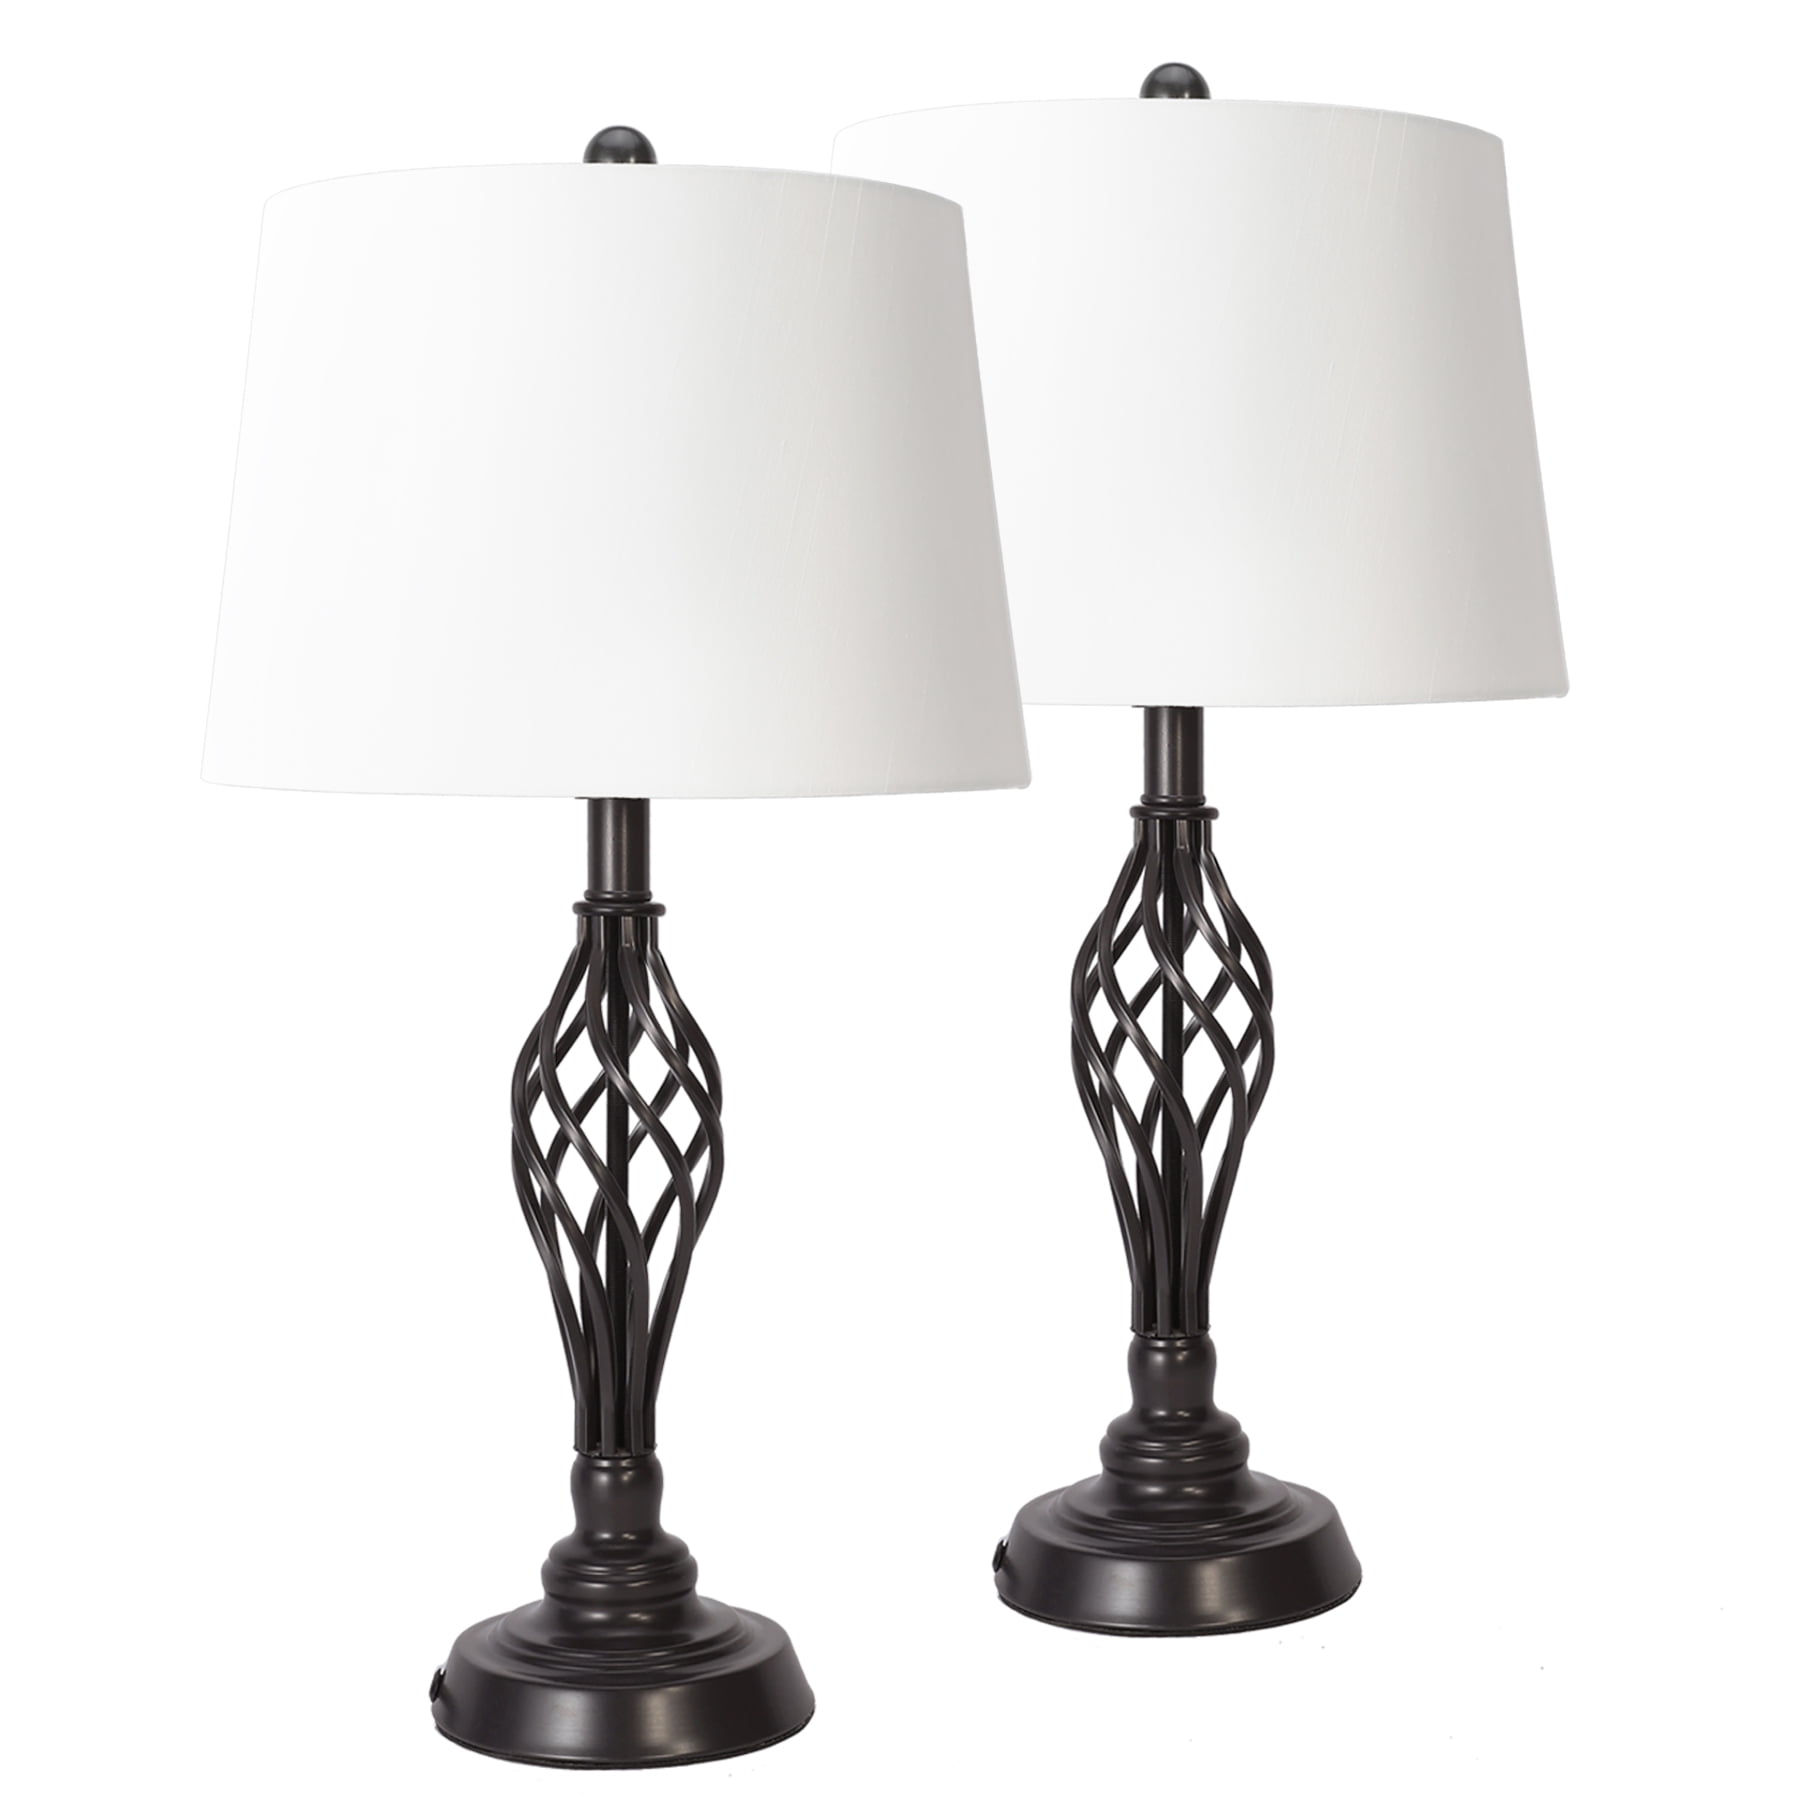 Farmhouse Table Lamps Set Of 2 Bronze, Wrought Iron Bedside Table Lamps